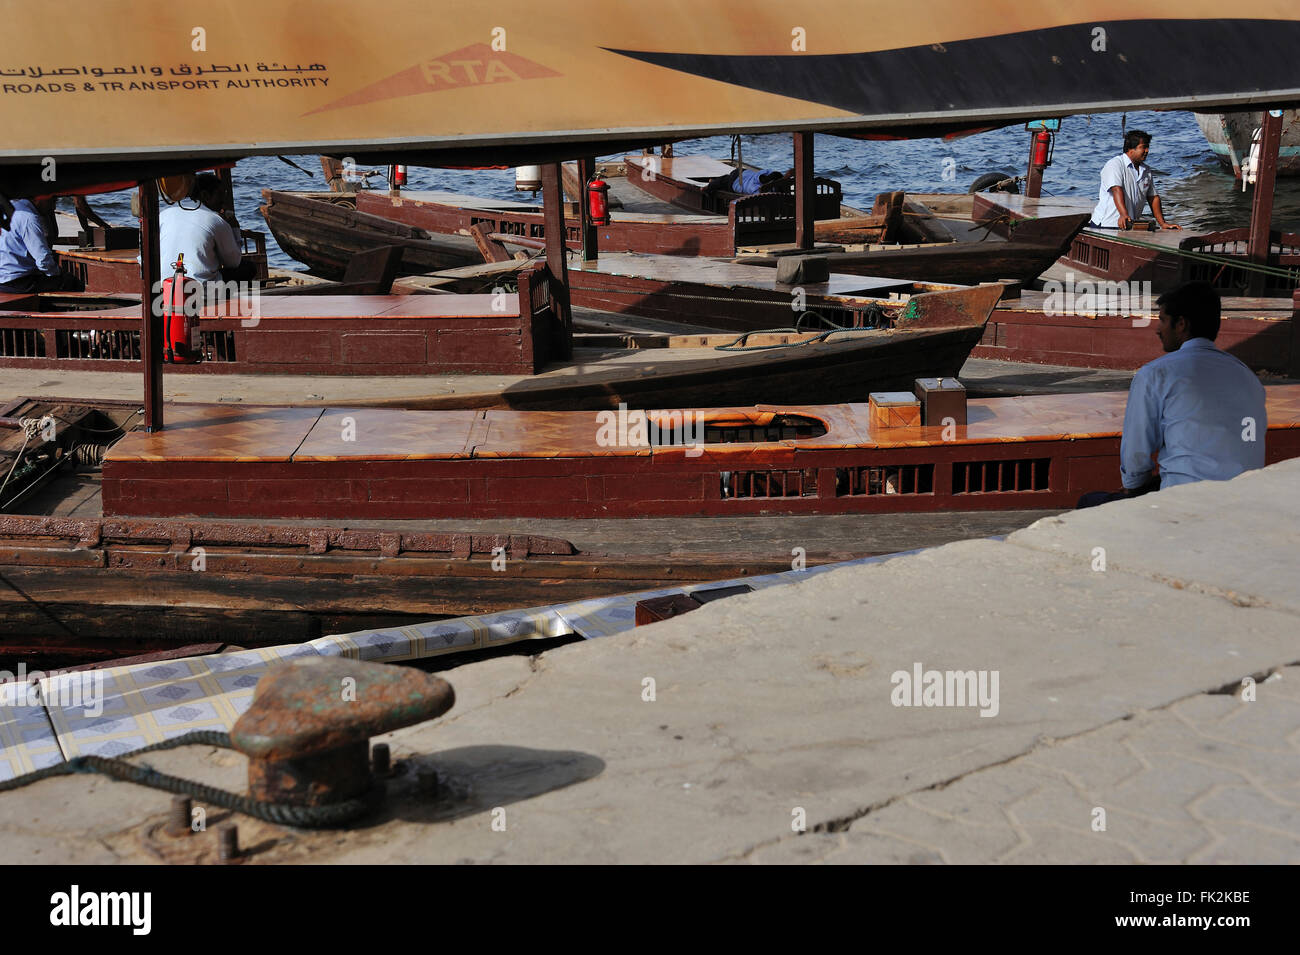 water taxis on the quay, creek channel in Dubai Stock Photo